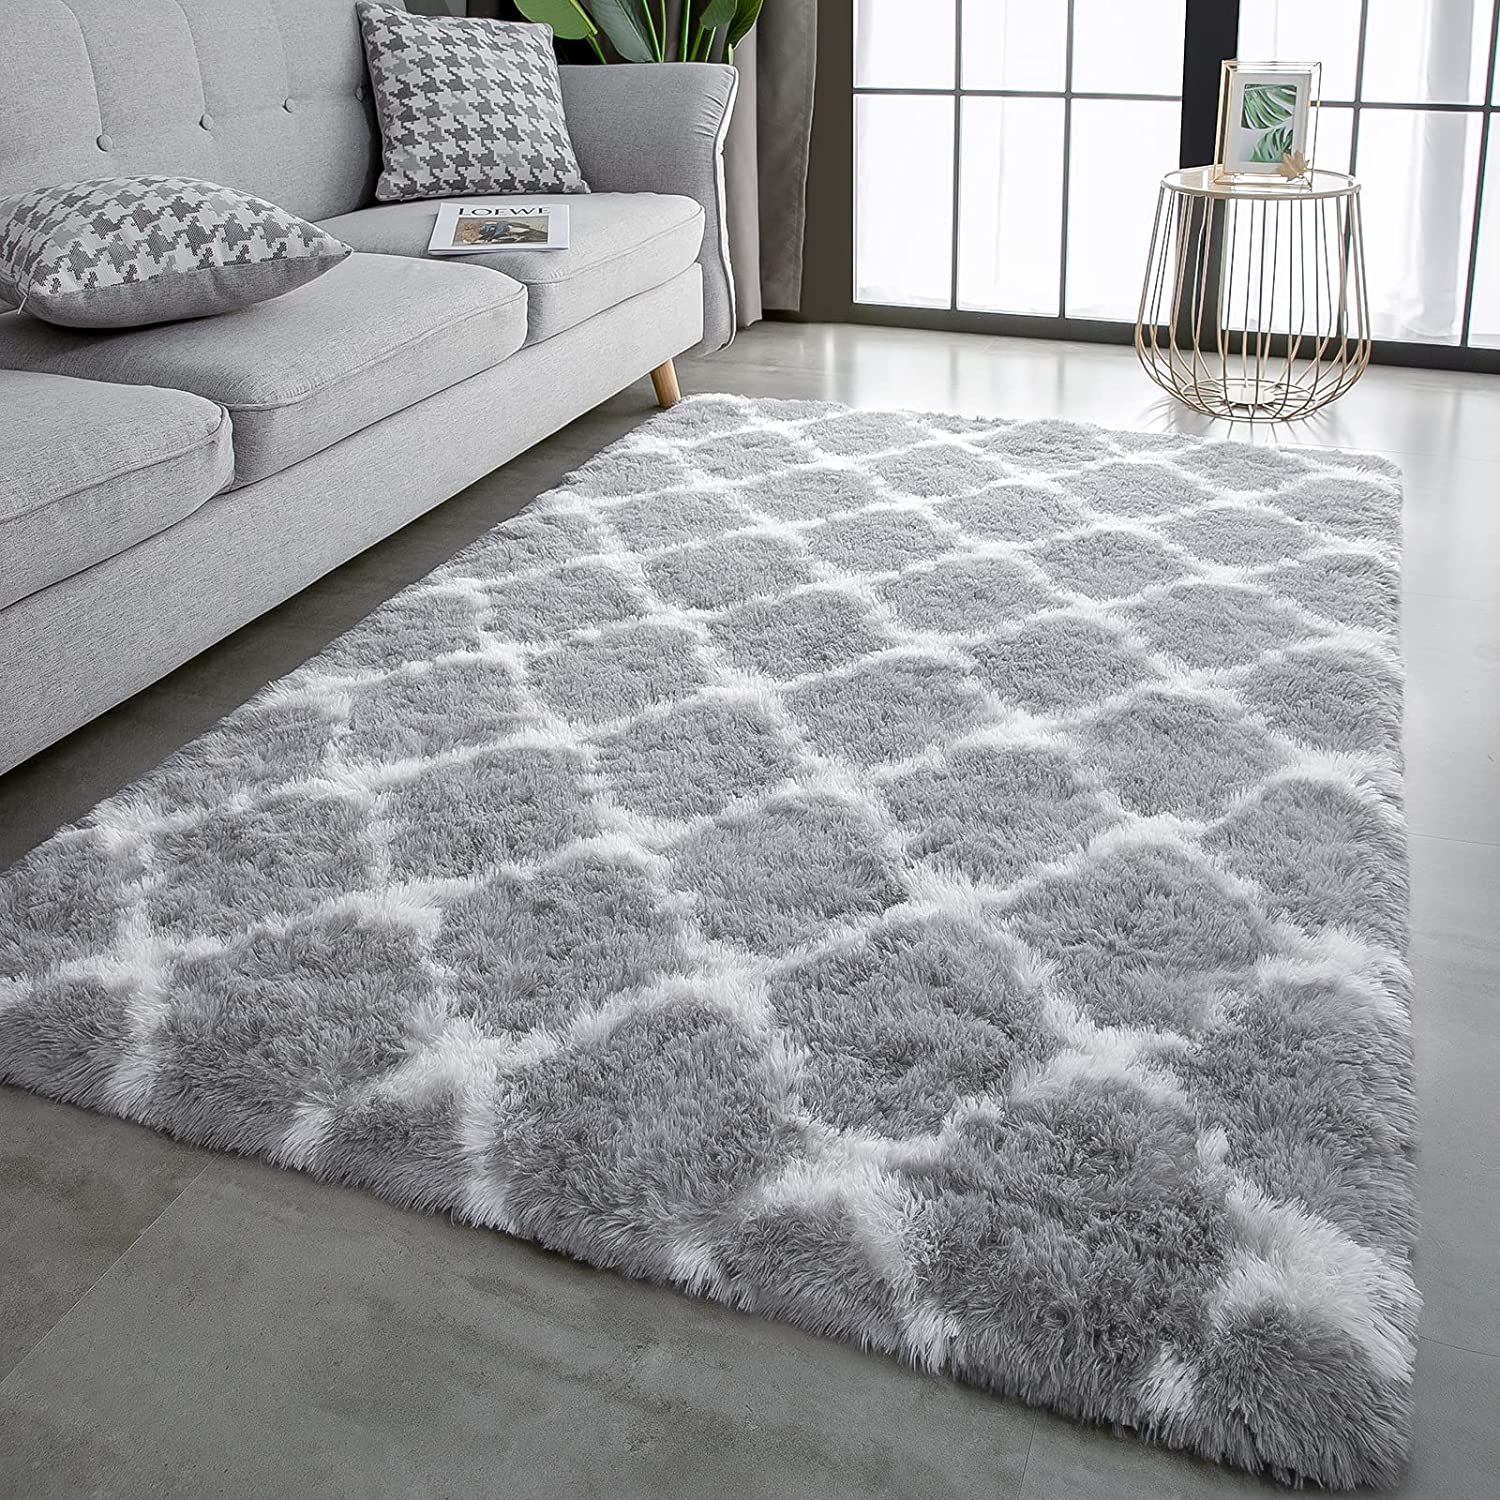 Comeet Ultra Soft Fuzzy Rugs For Bedroom Grey And White Fluffy Carpet,  Geometric | Ebay Intended For White Soft Rugs (Photo 7 of 15)